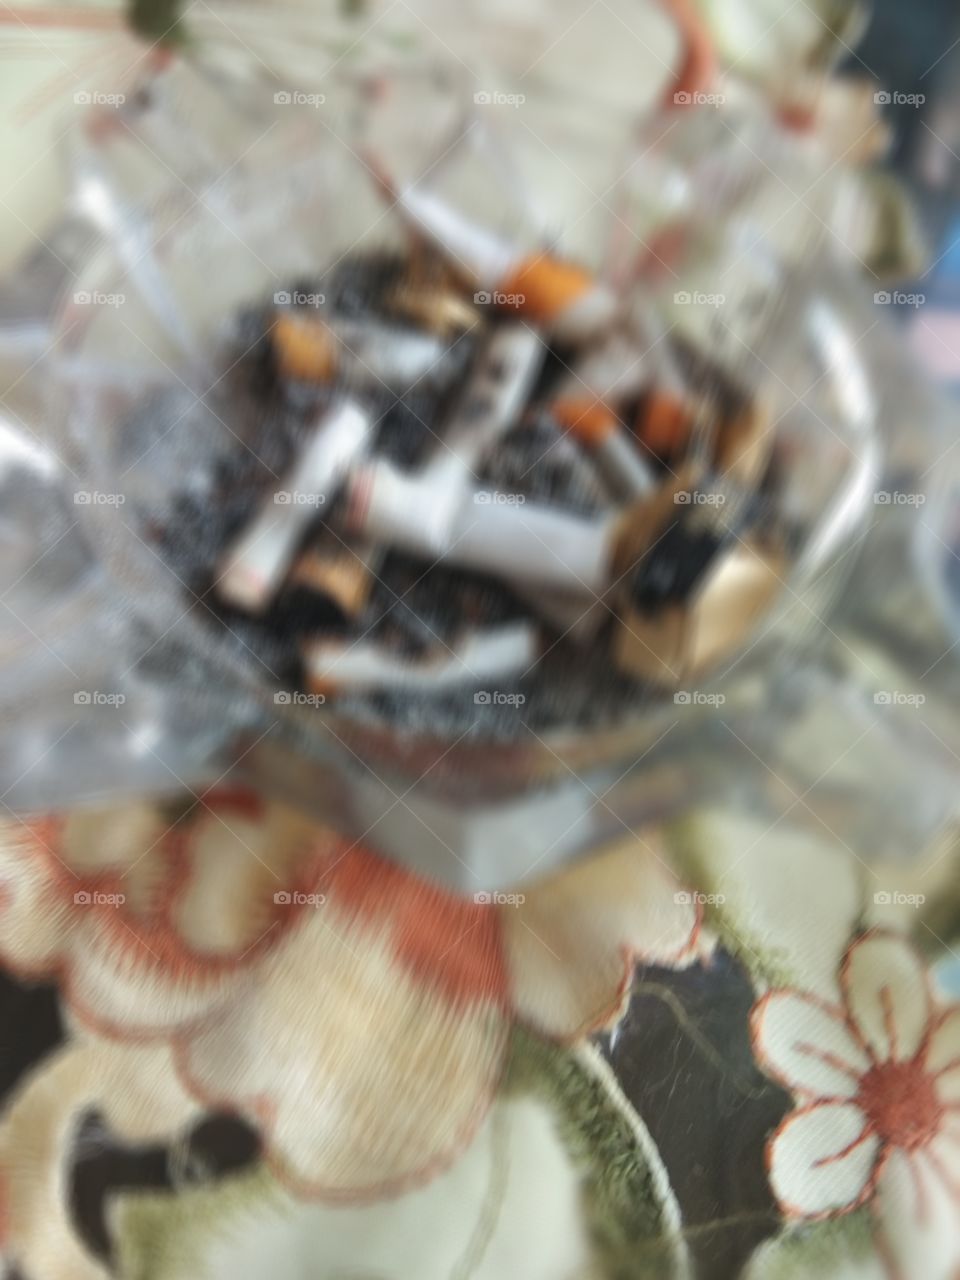 blur photos of ashtrays with cigarette butts